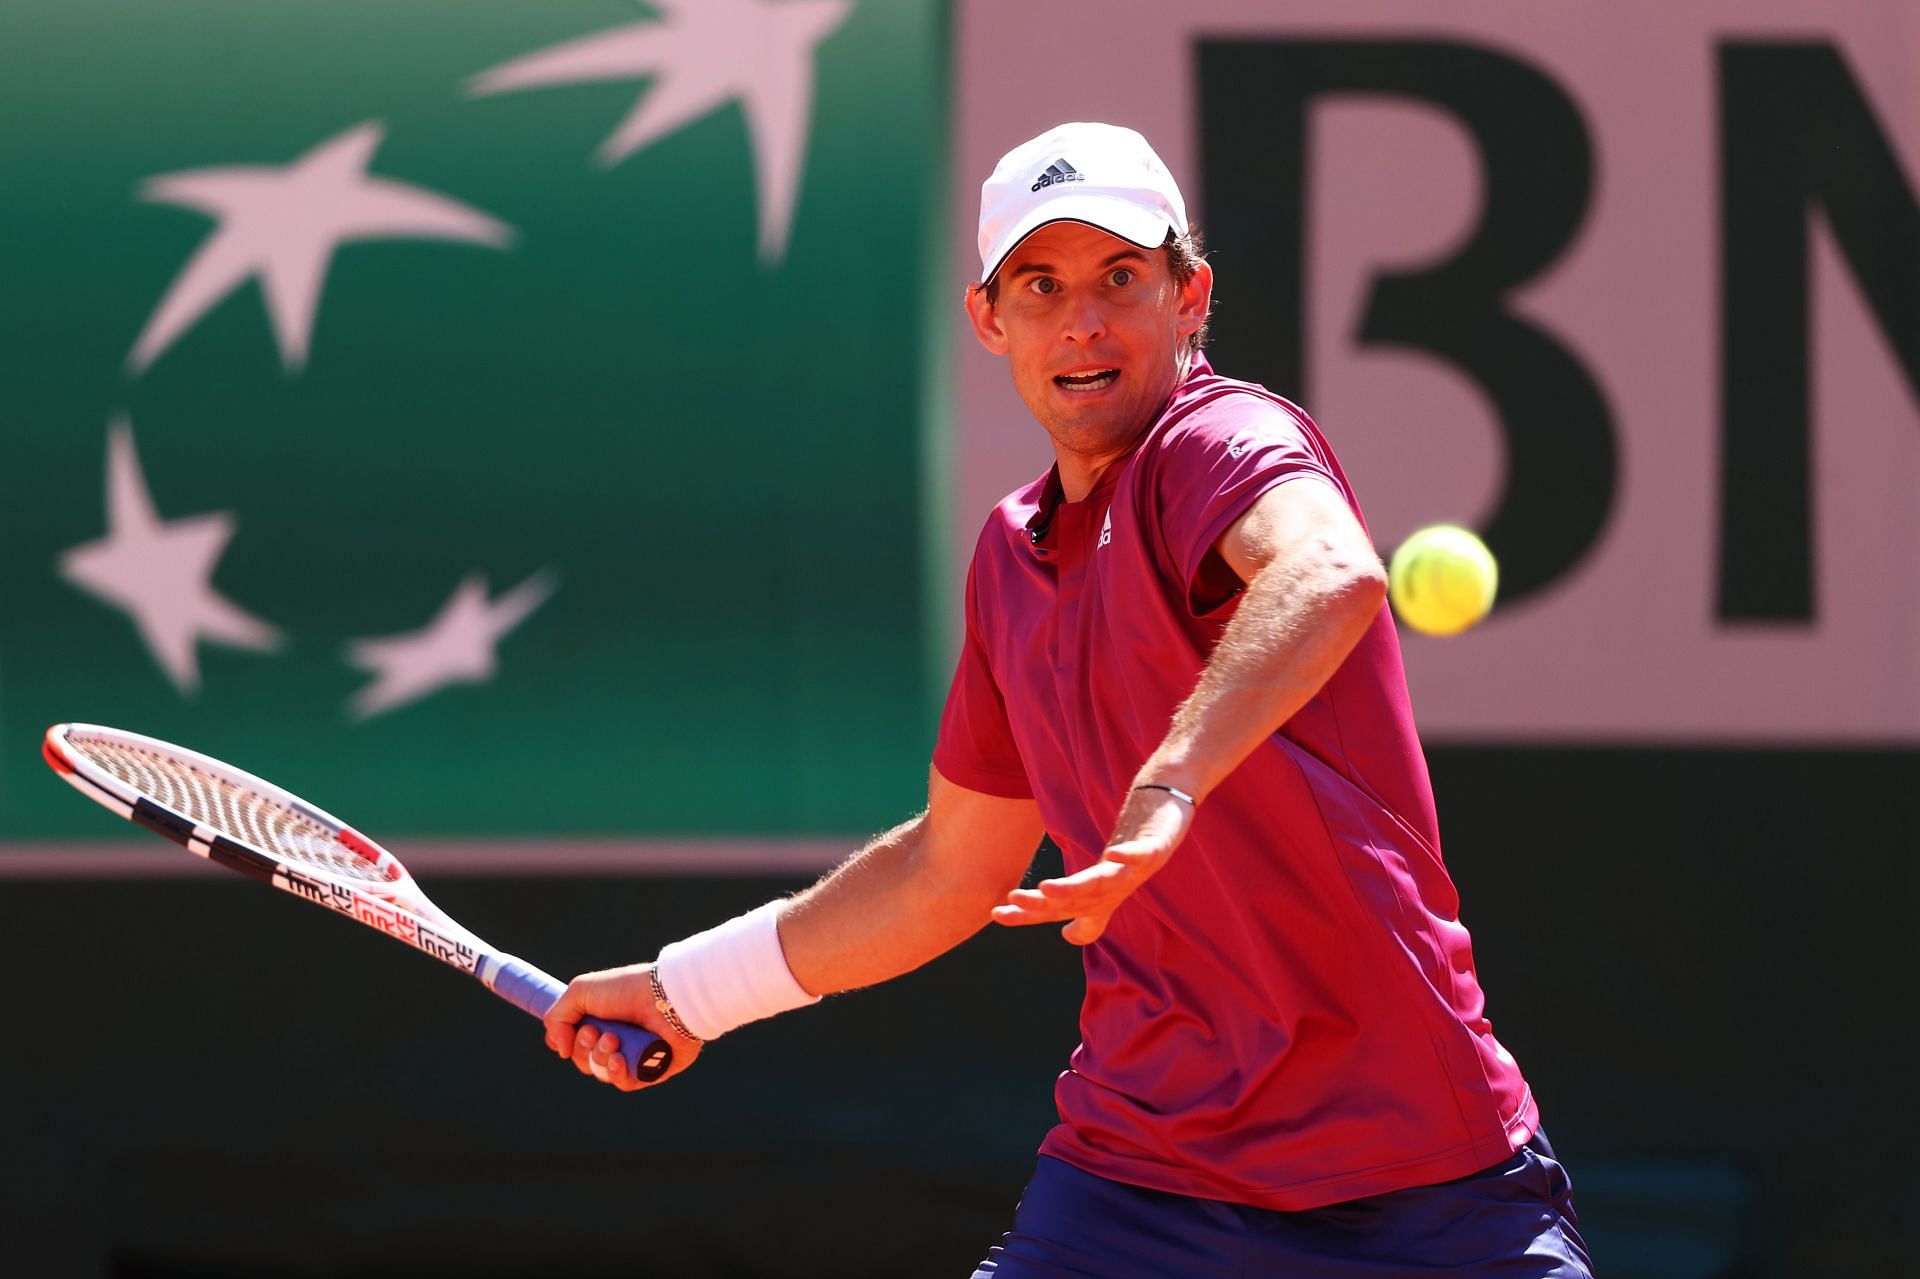 Dominic Thiem during his first round match at the 2021 French Open